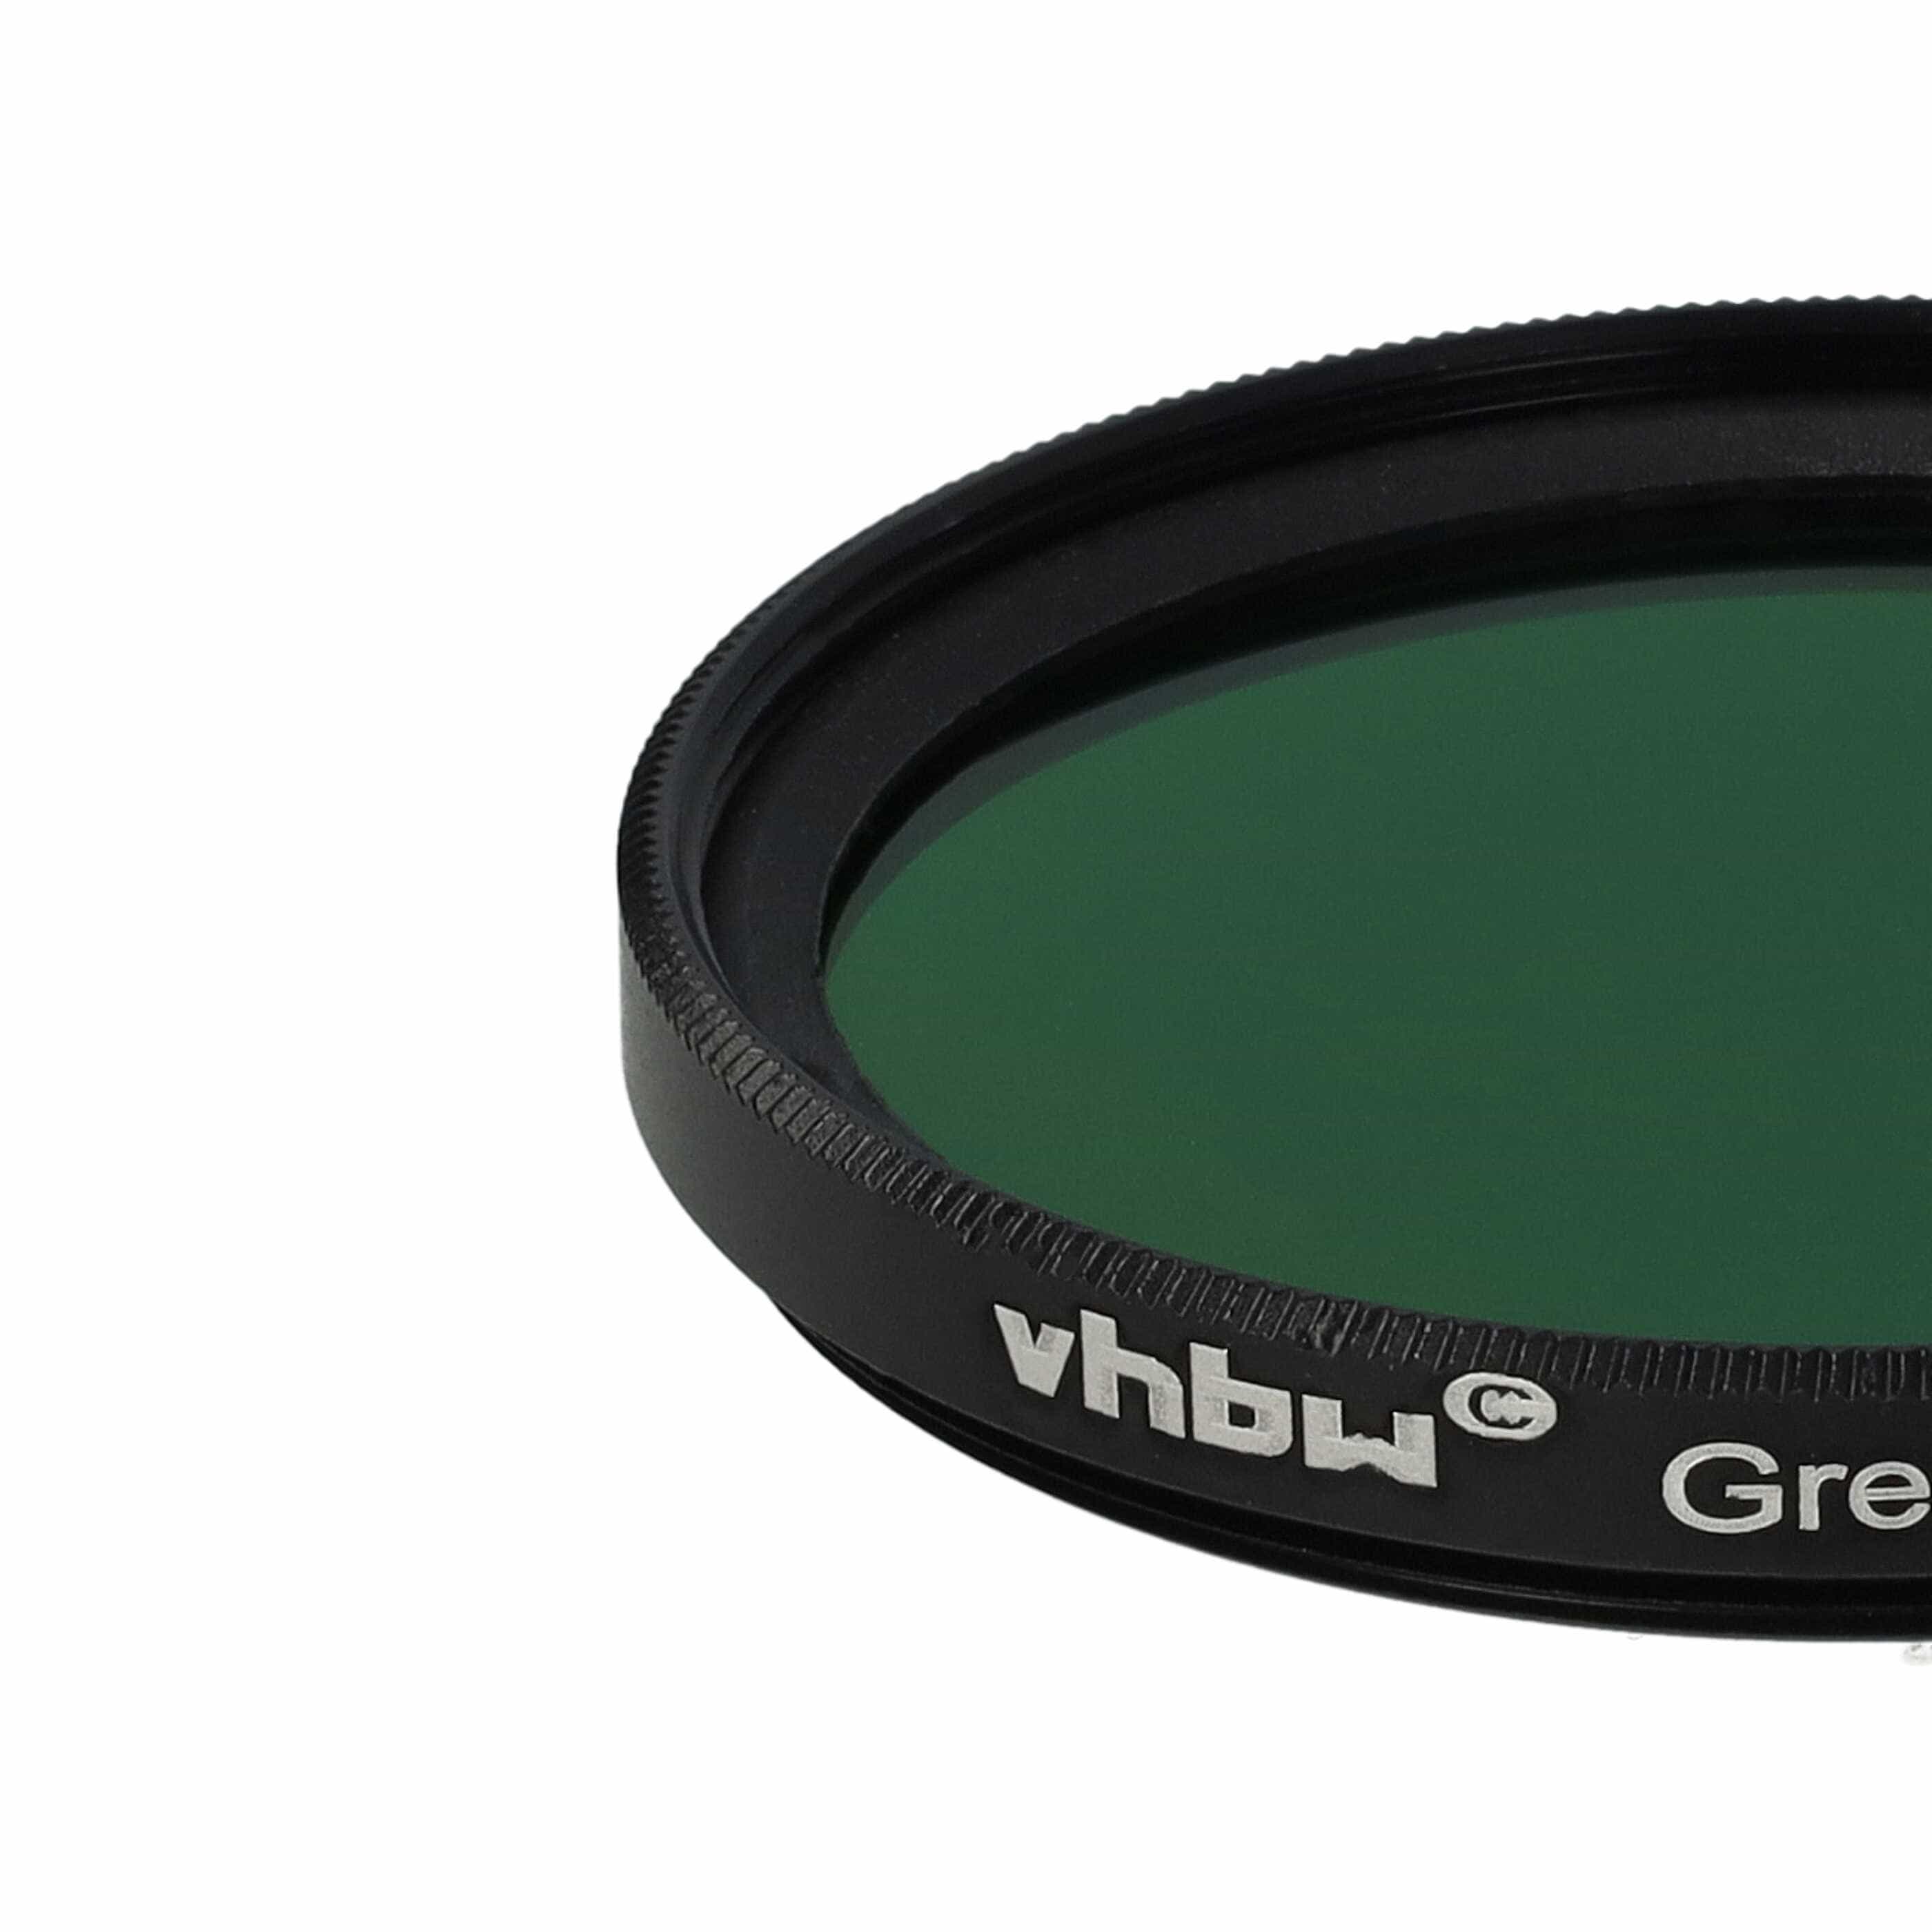 Coloured Filter, Green suitable for Camera Lenses with 43 mm Filter Thread - Green Filter